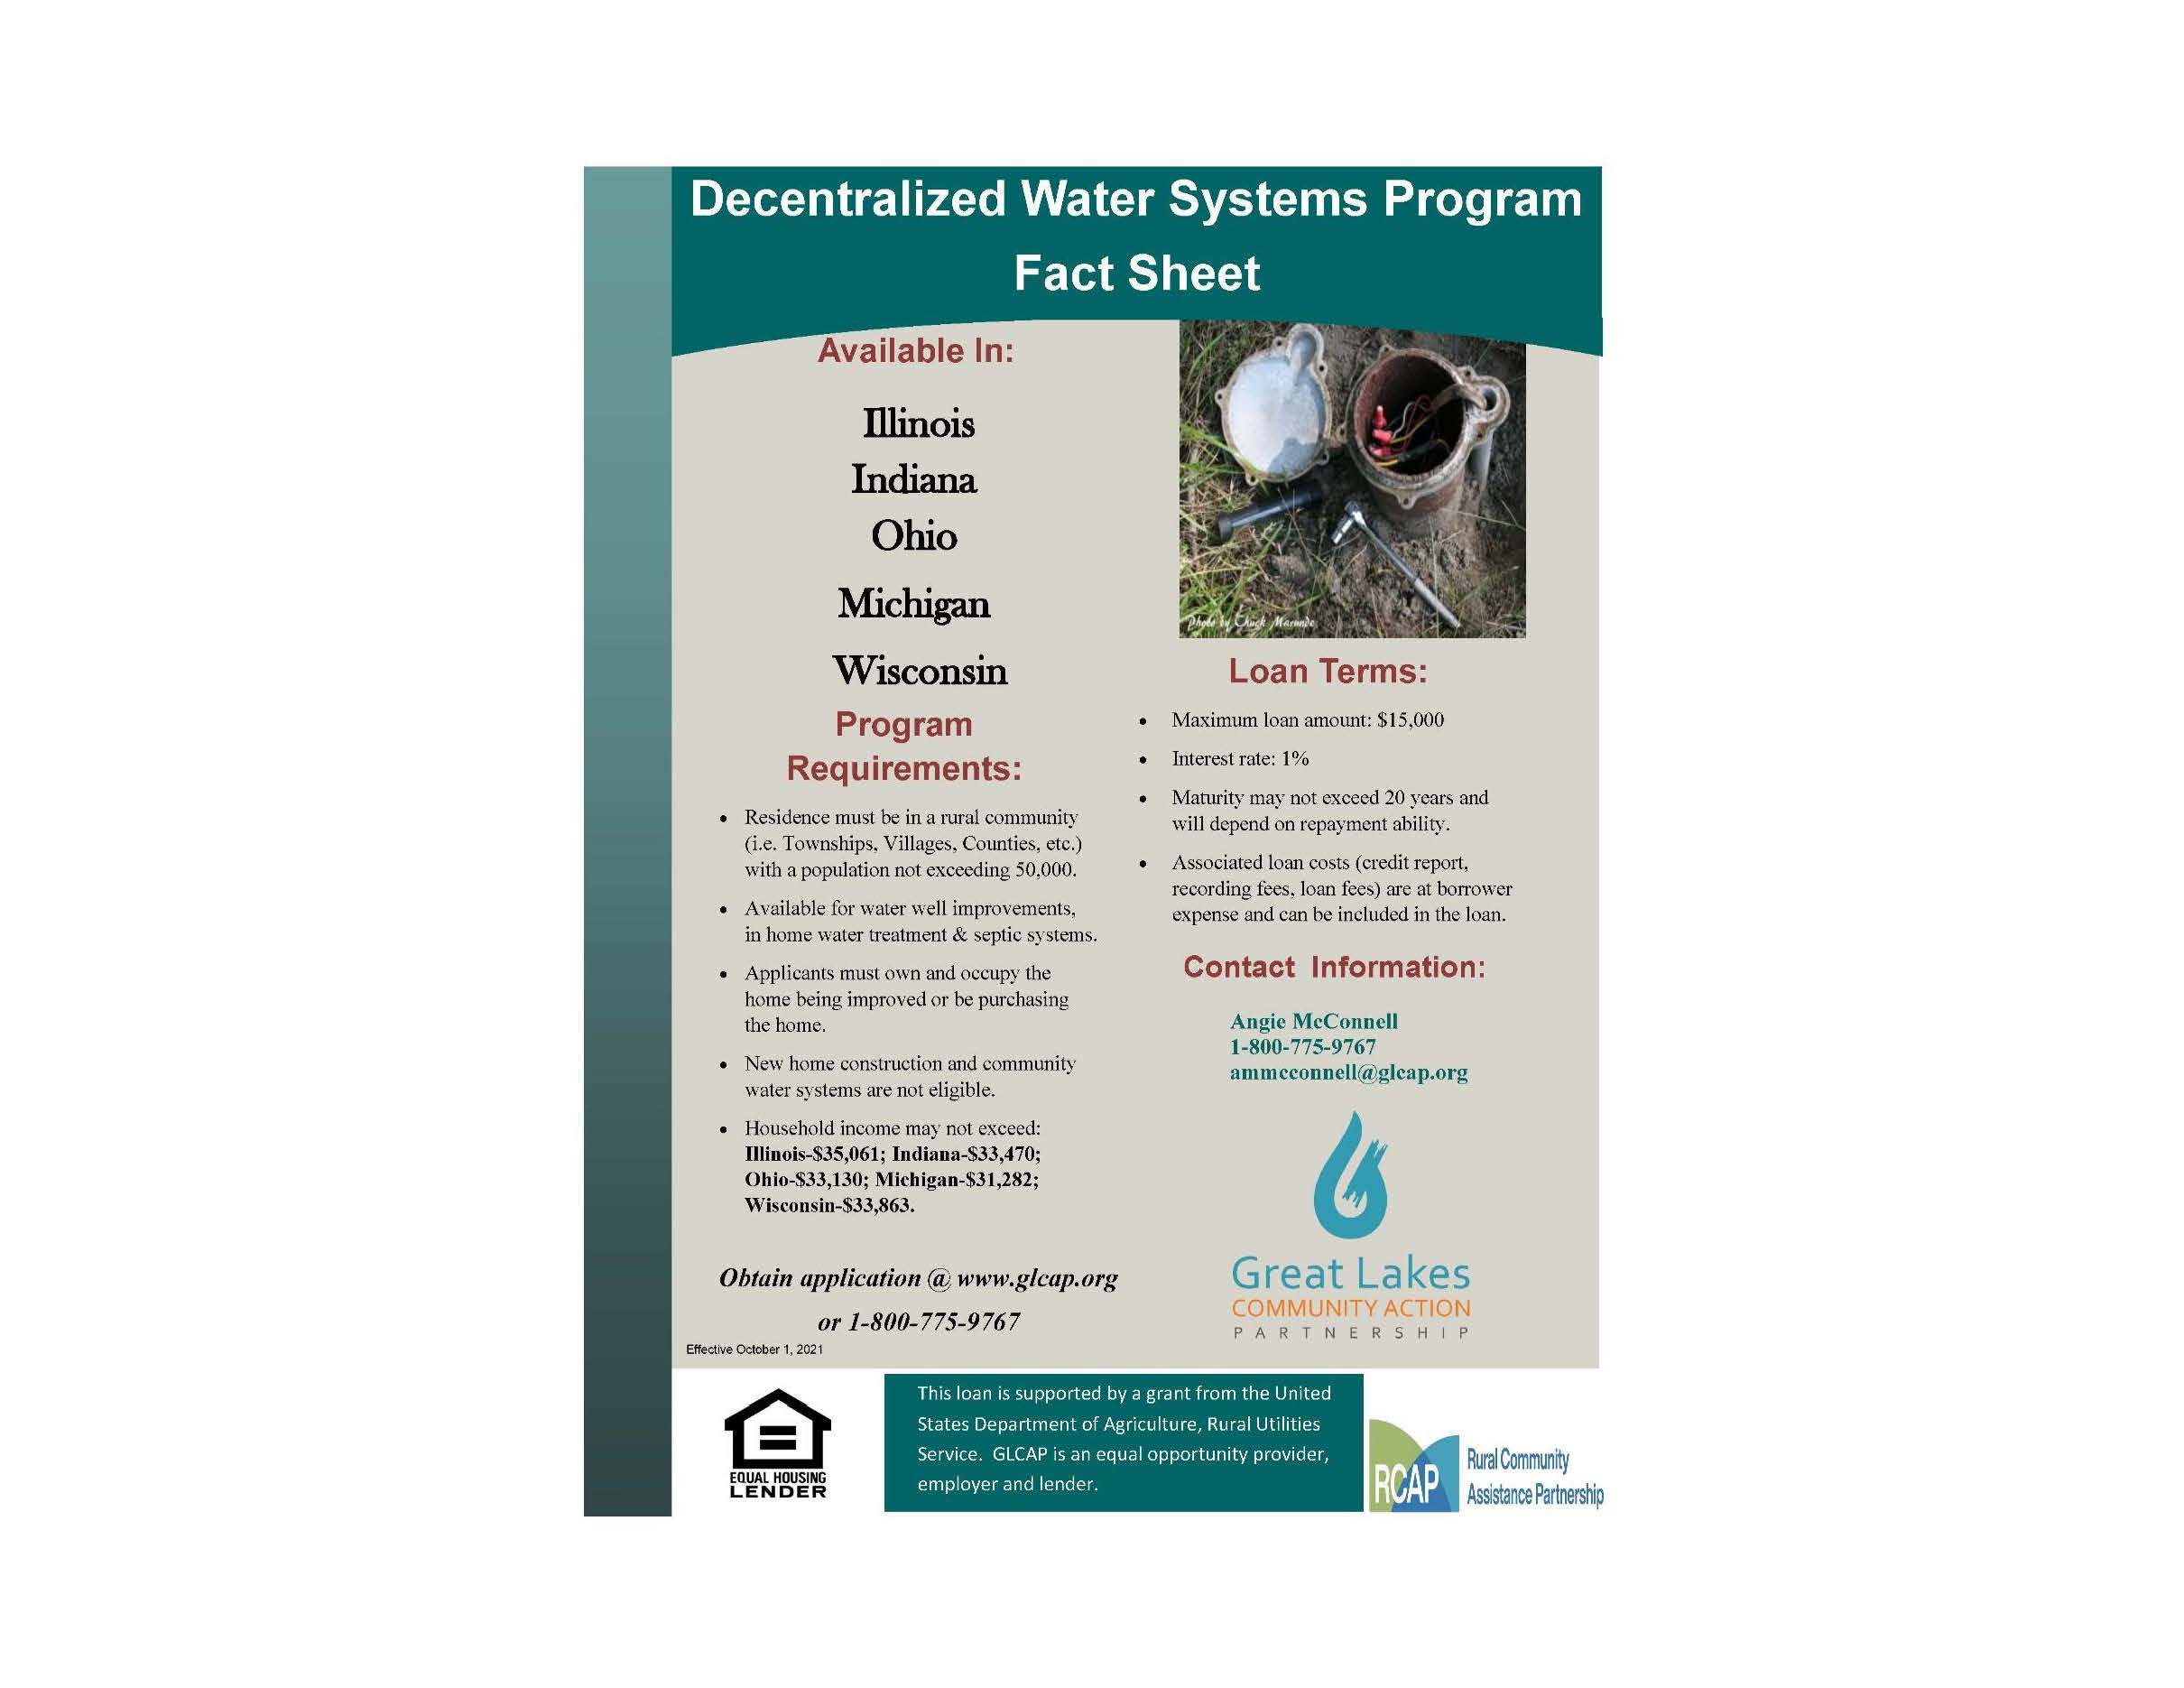 Septic & Water Well Improvement Loans